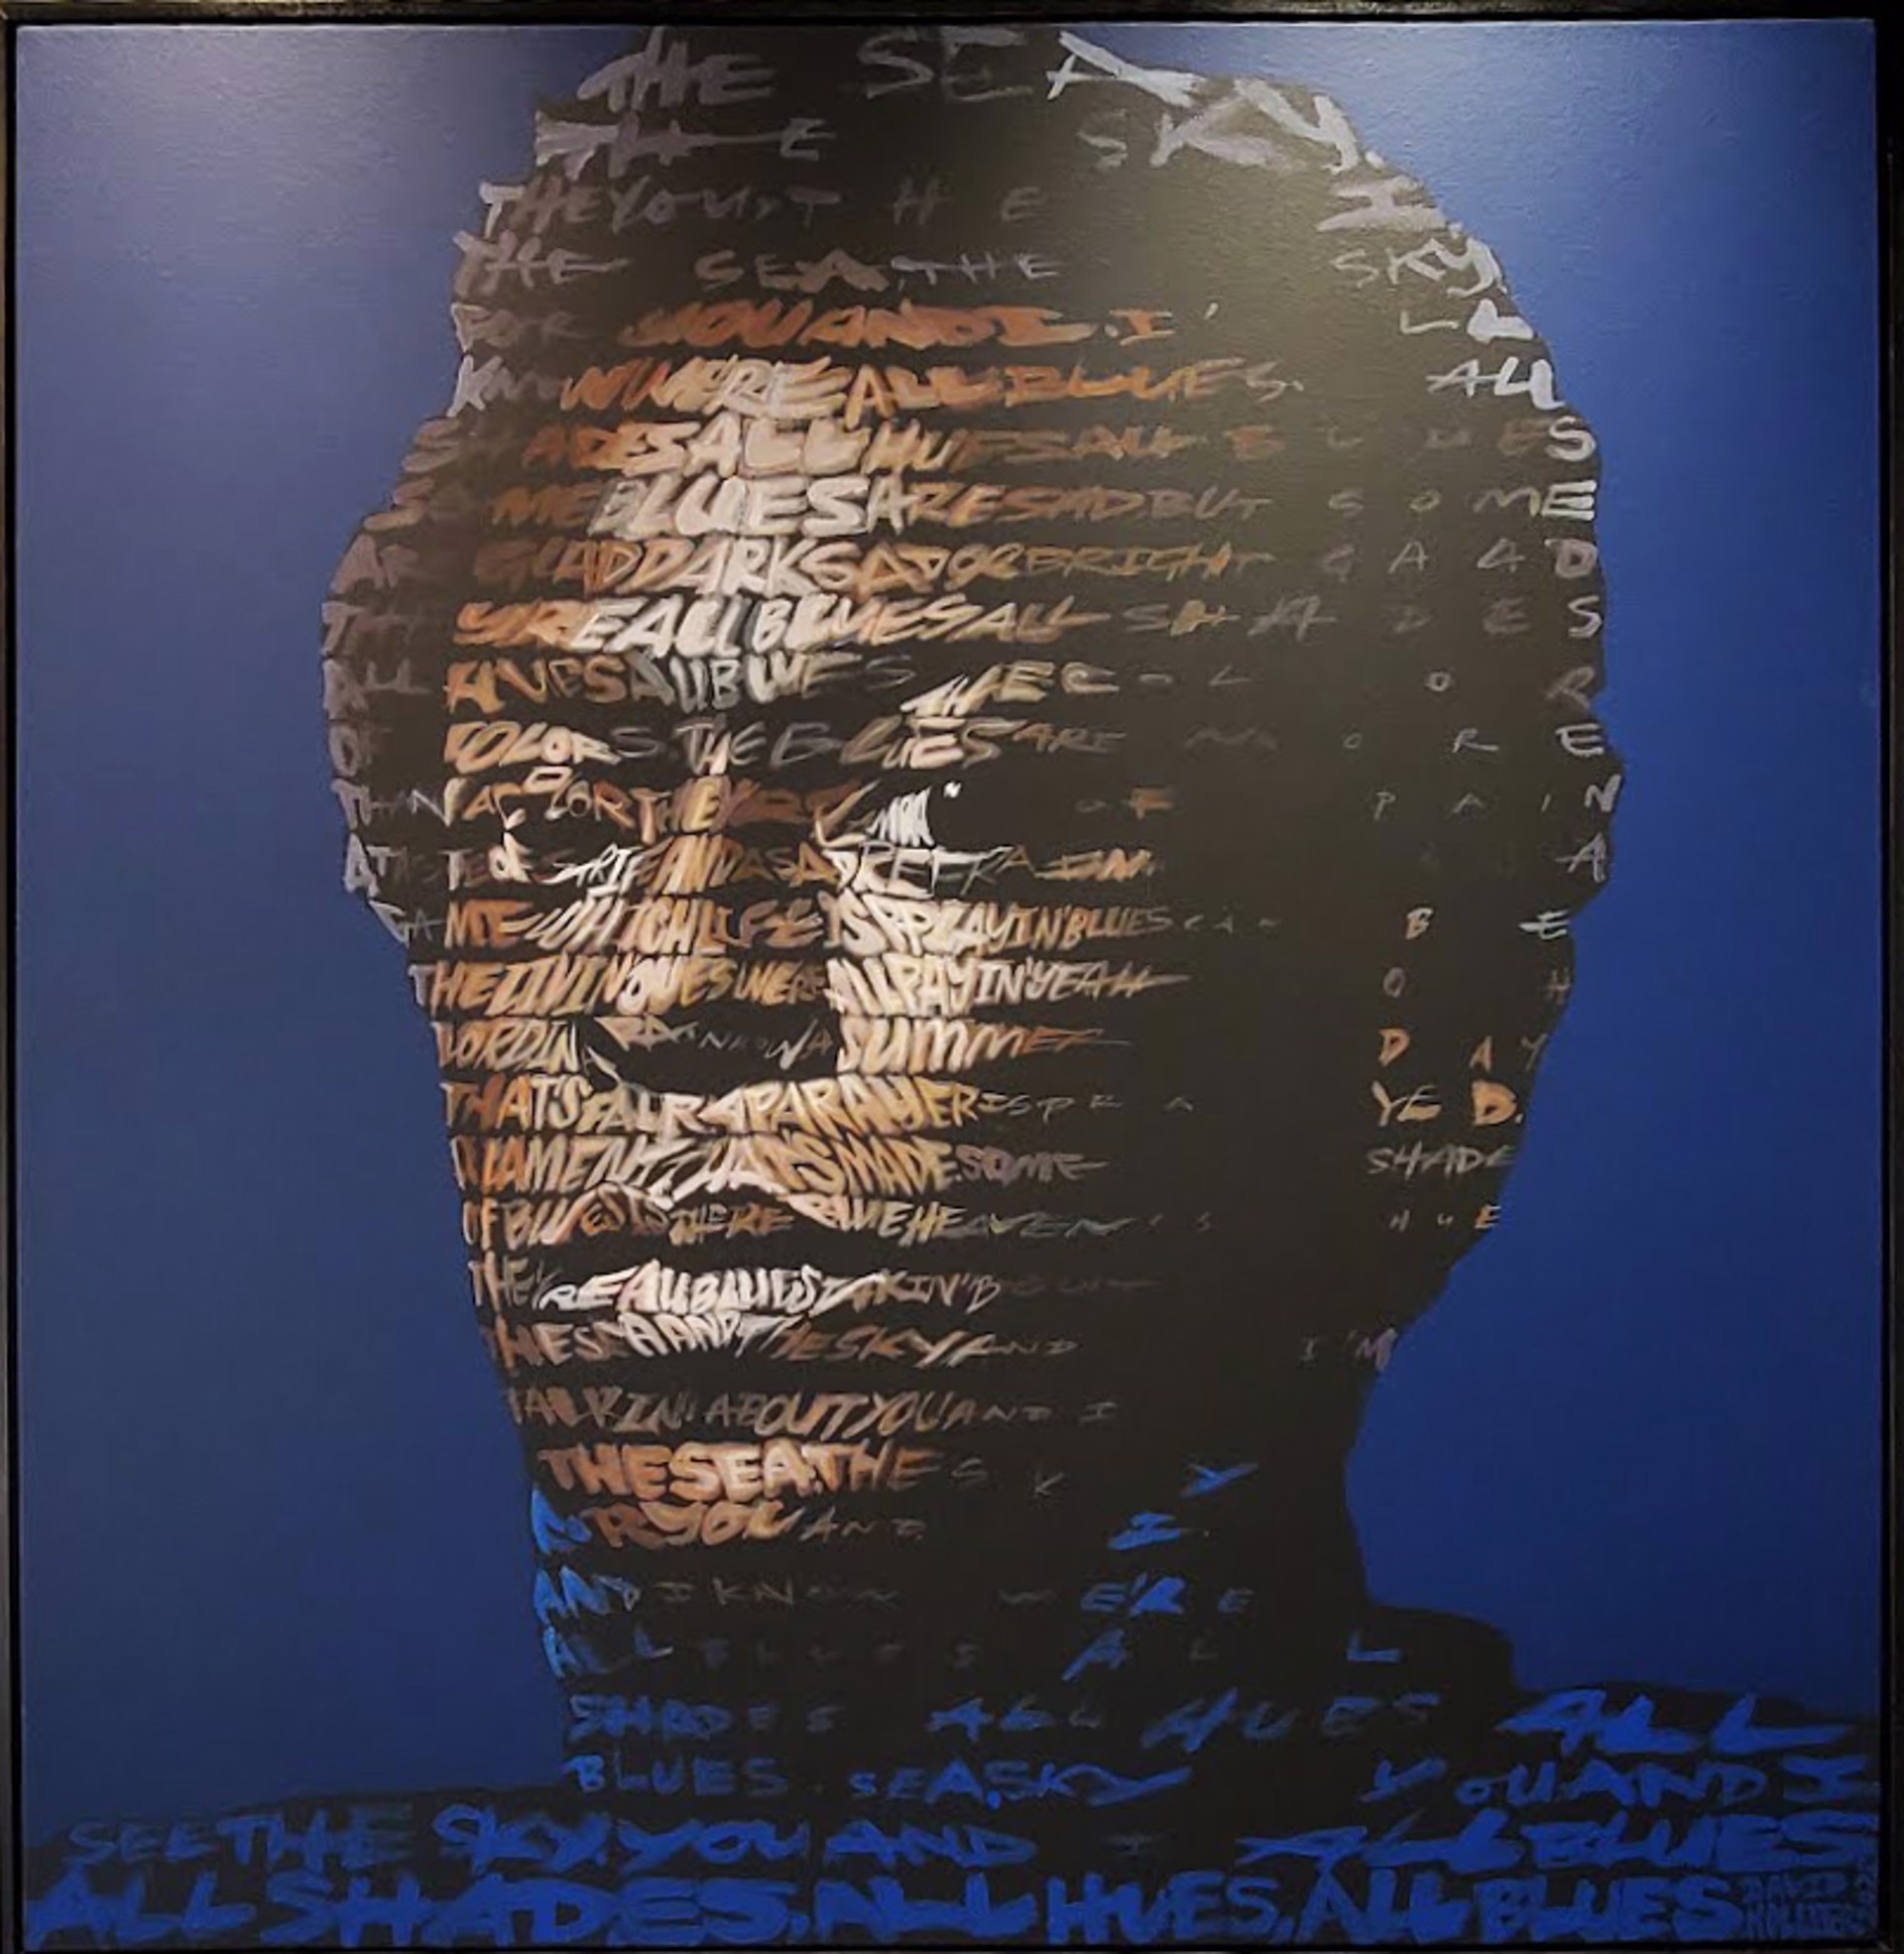 Miles Davis (Text: All Blues) by David Hollier